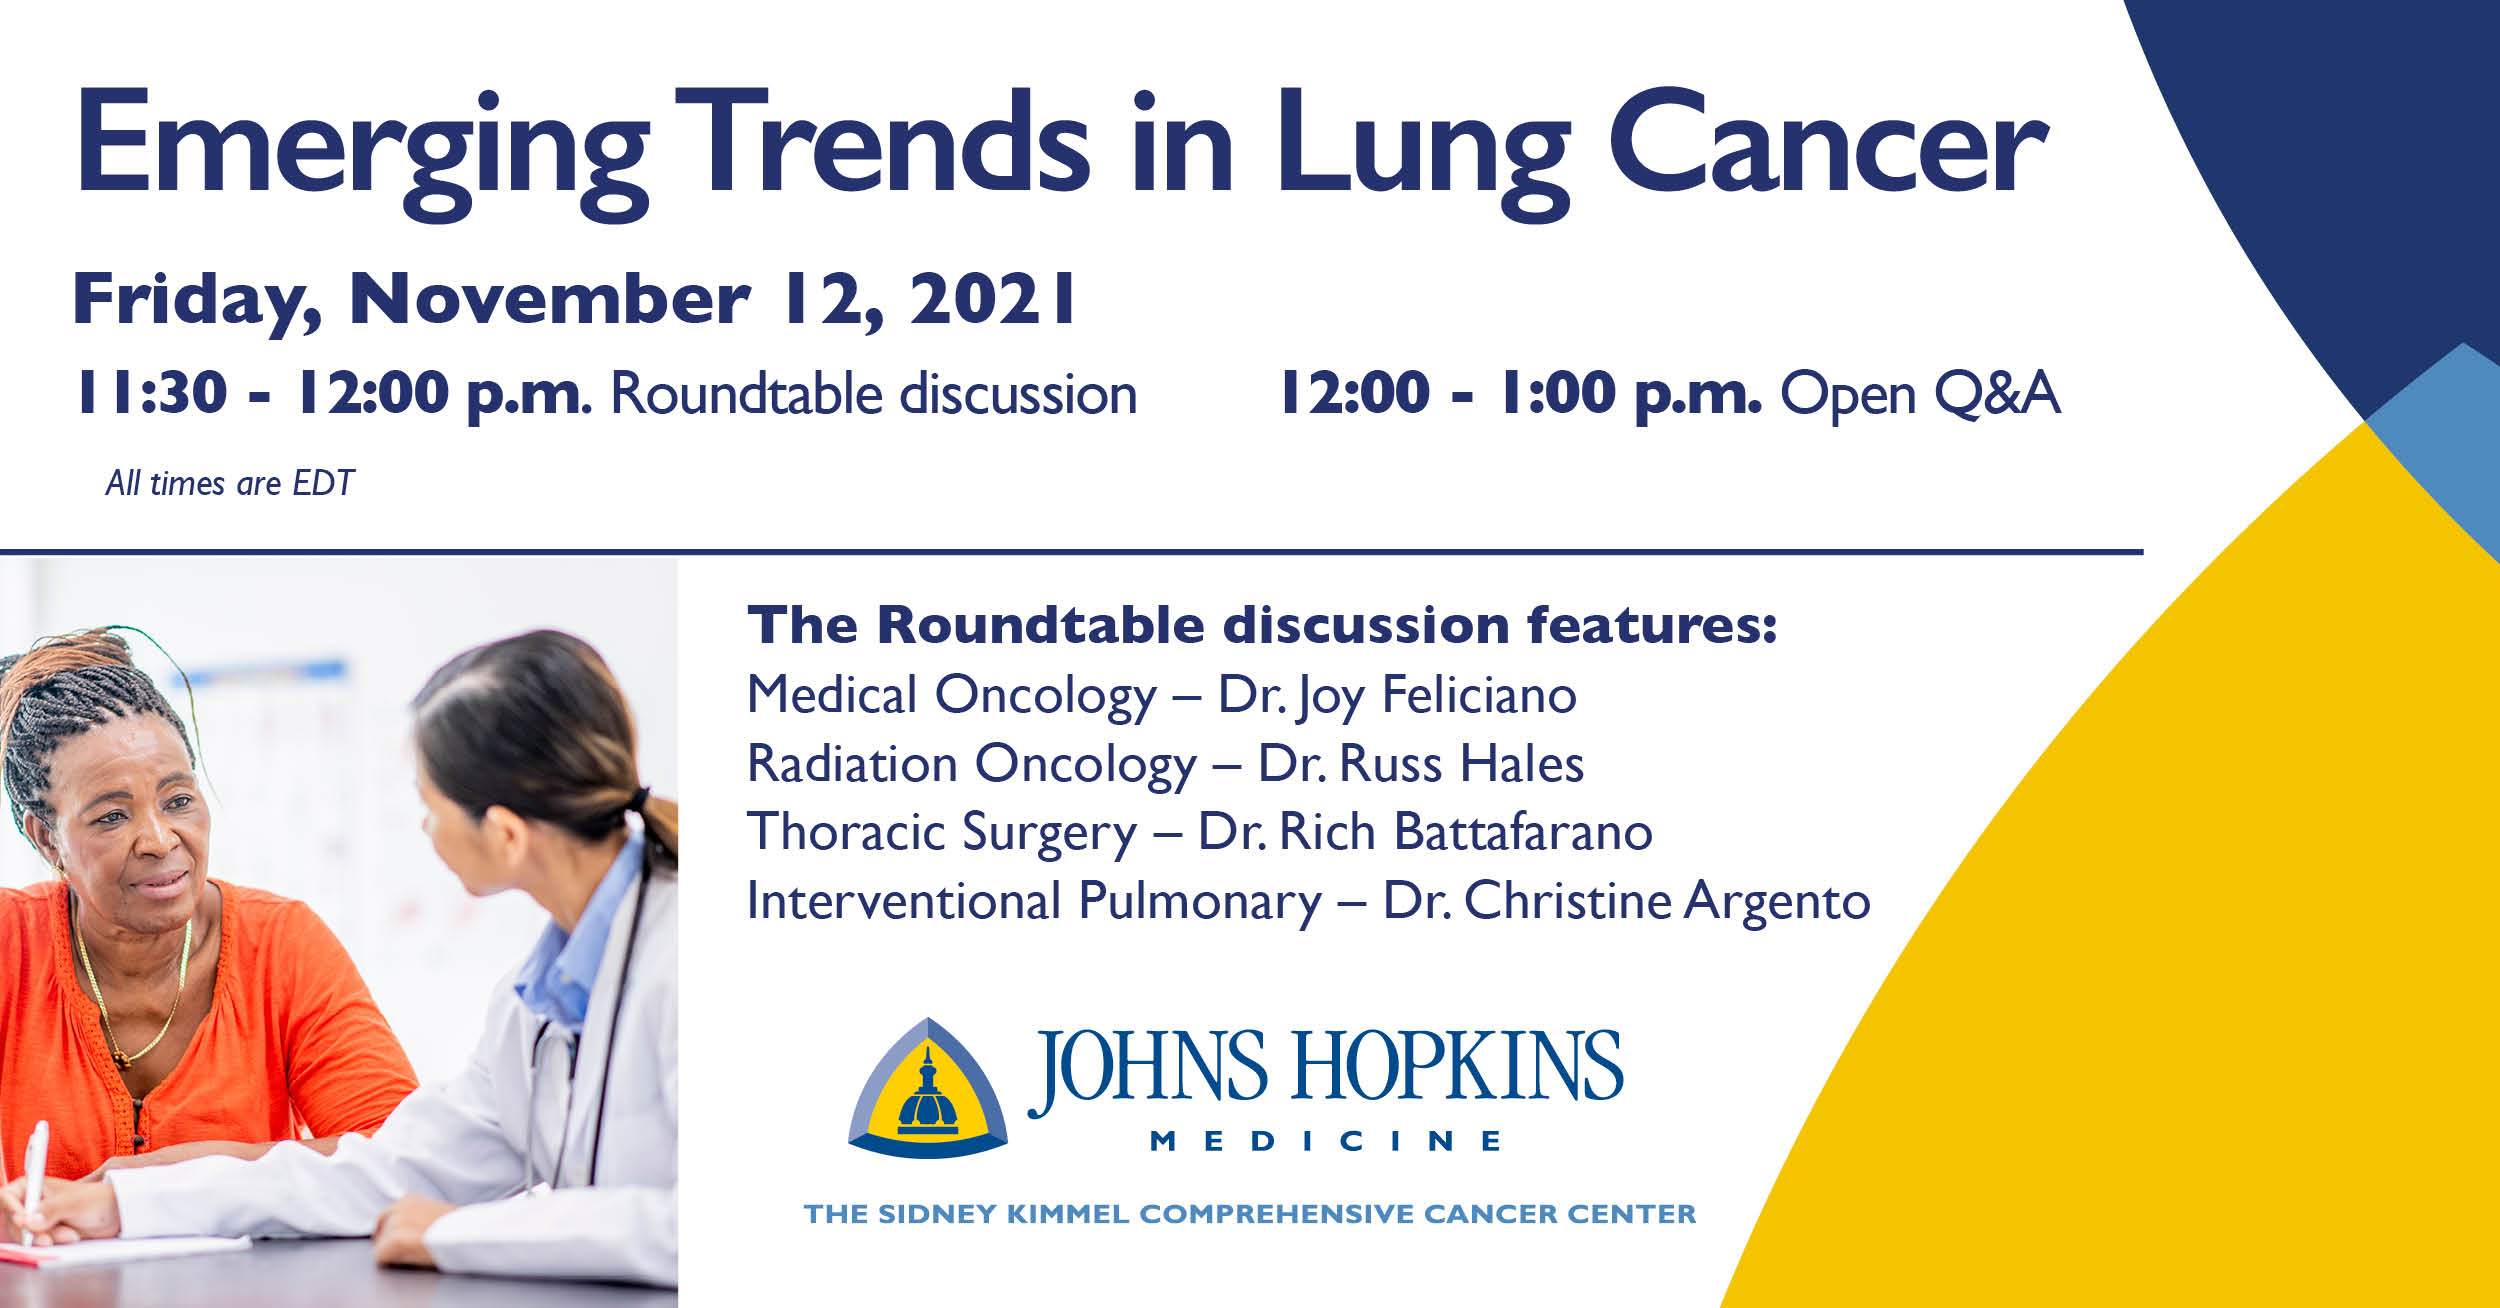 Flyer for Emerging Trends in Lung Cancer event